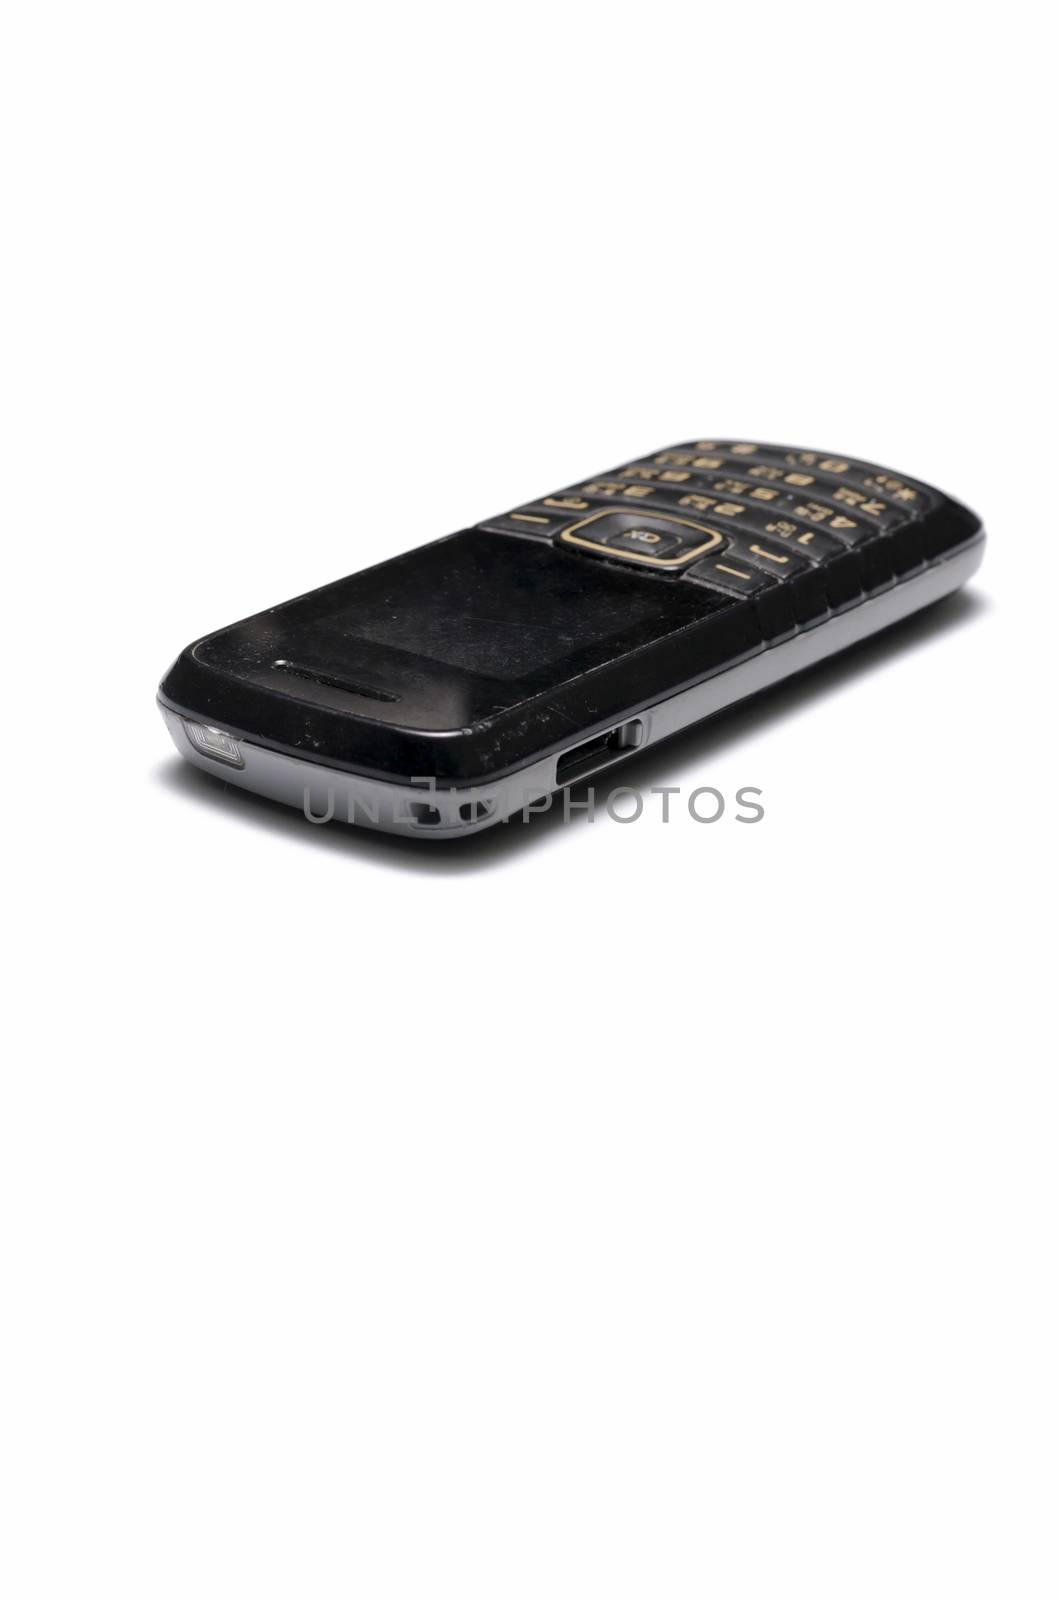 old mobile phone on a white background